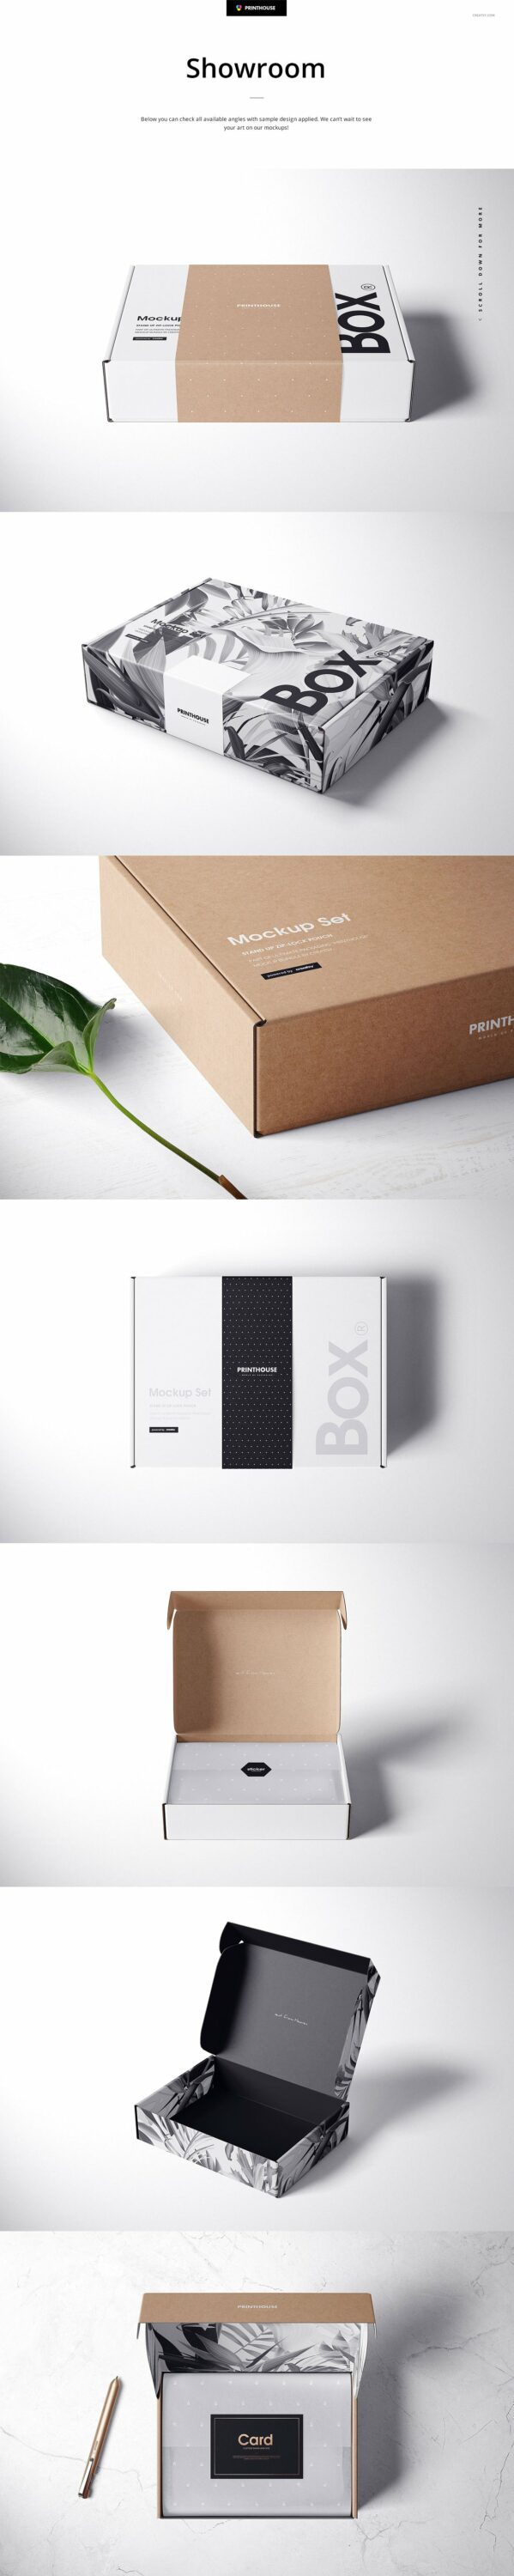 A set of images of mailboxes with an irresistible design.